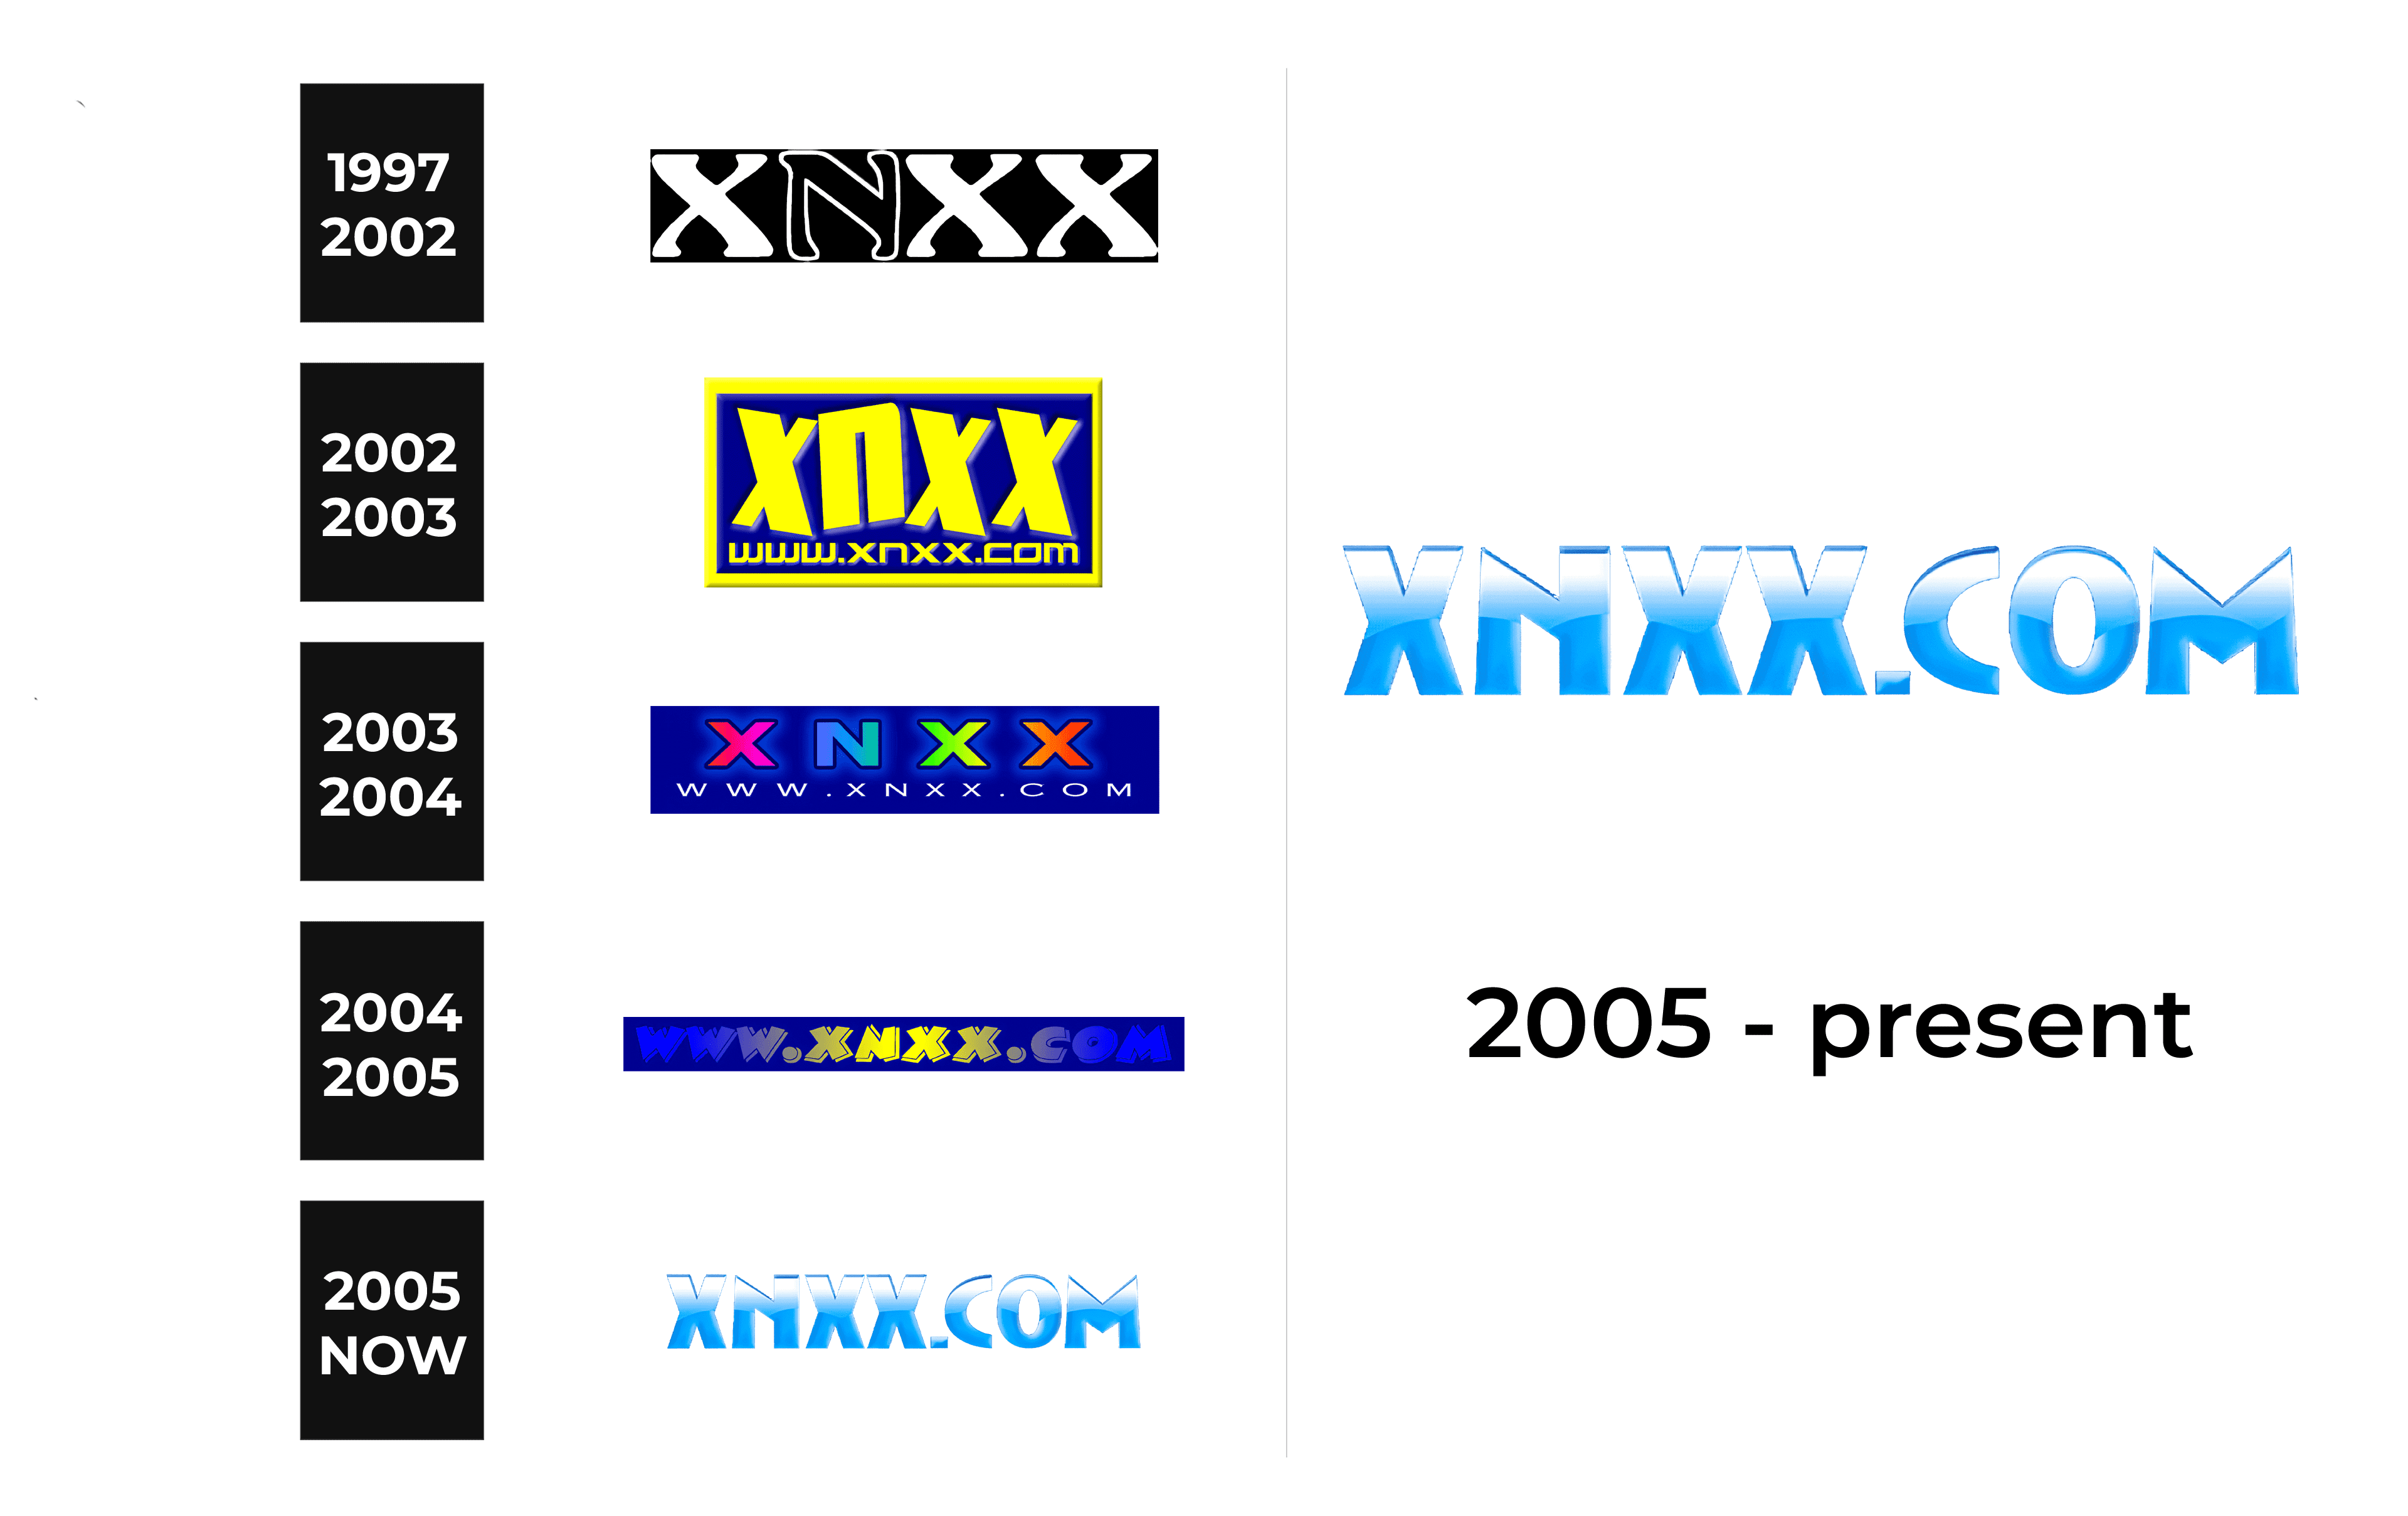 Indeaxnxx - XNXX Logo and sign, new logo meaning and history, PNG, SVG